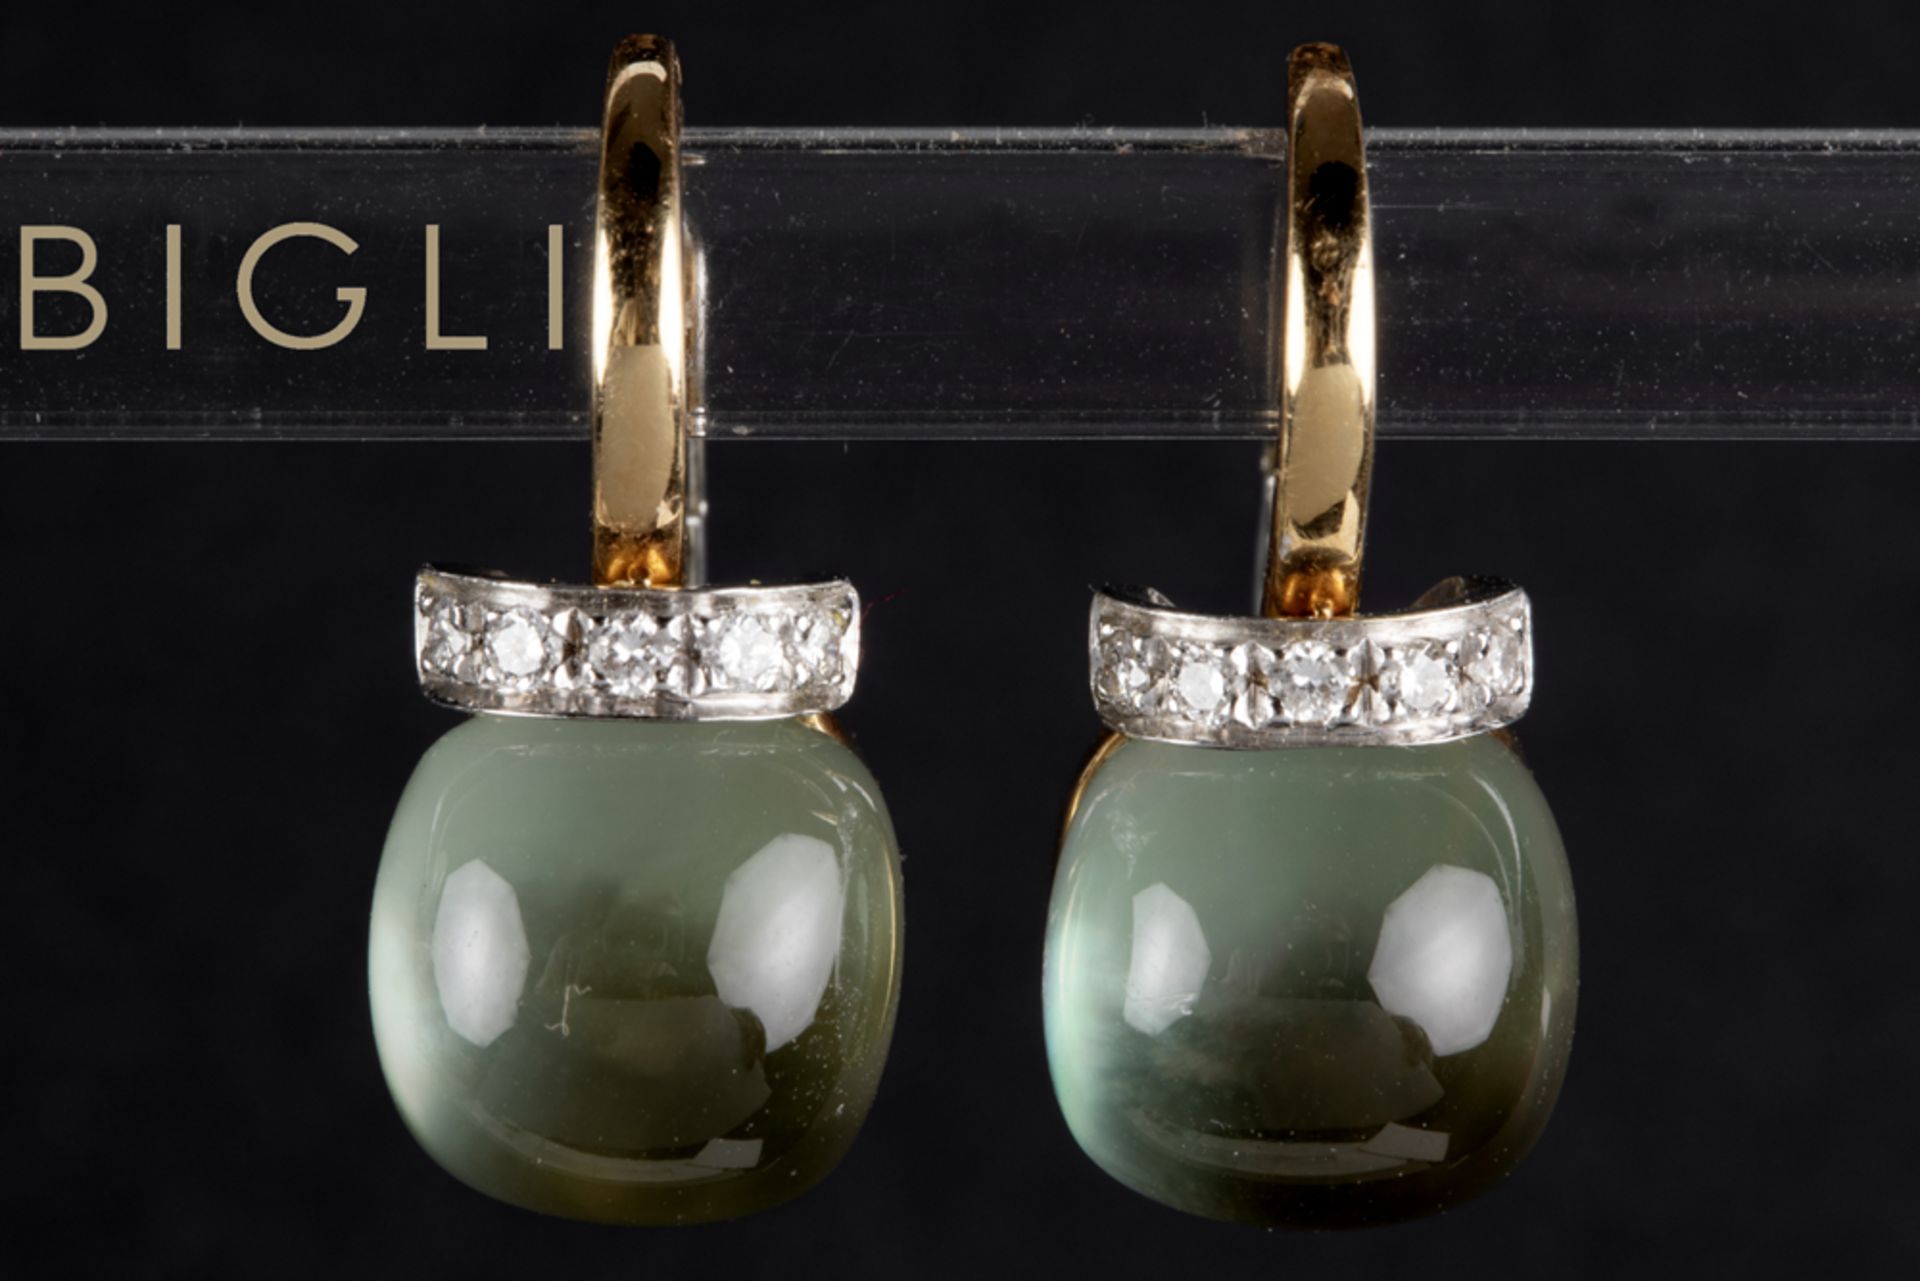 pair of Bigli marked earrings in white and pink gold (18 carat) with a semi-precious cabochon cut